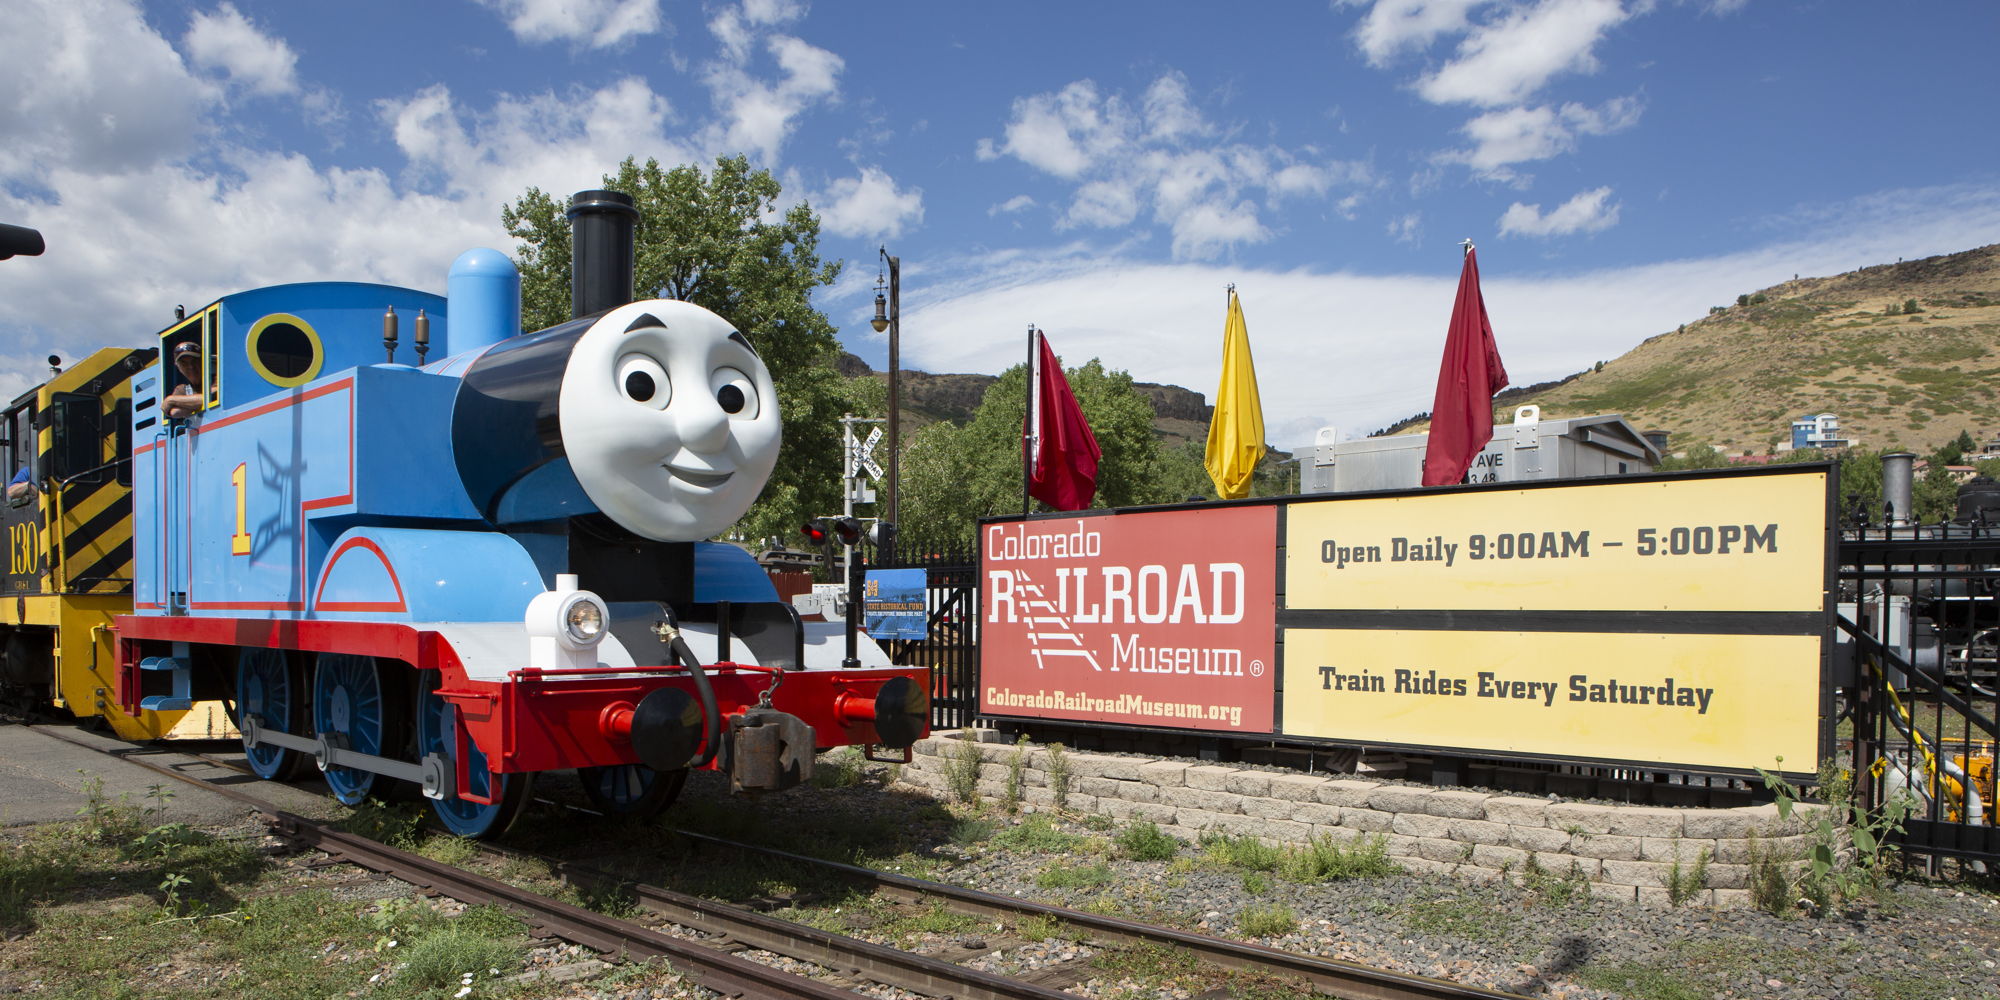 Day Out With Thomas promotional image